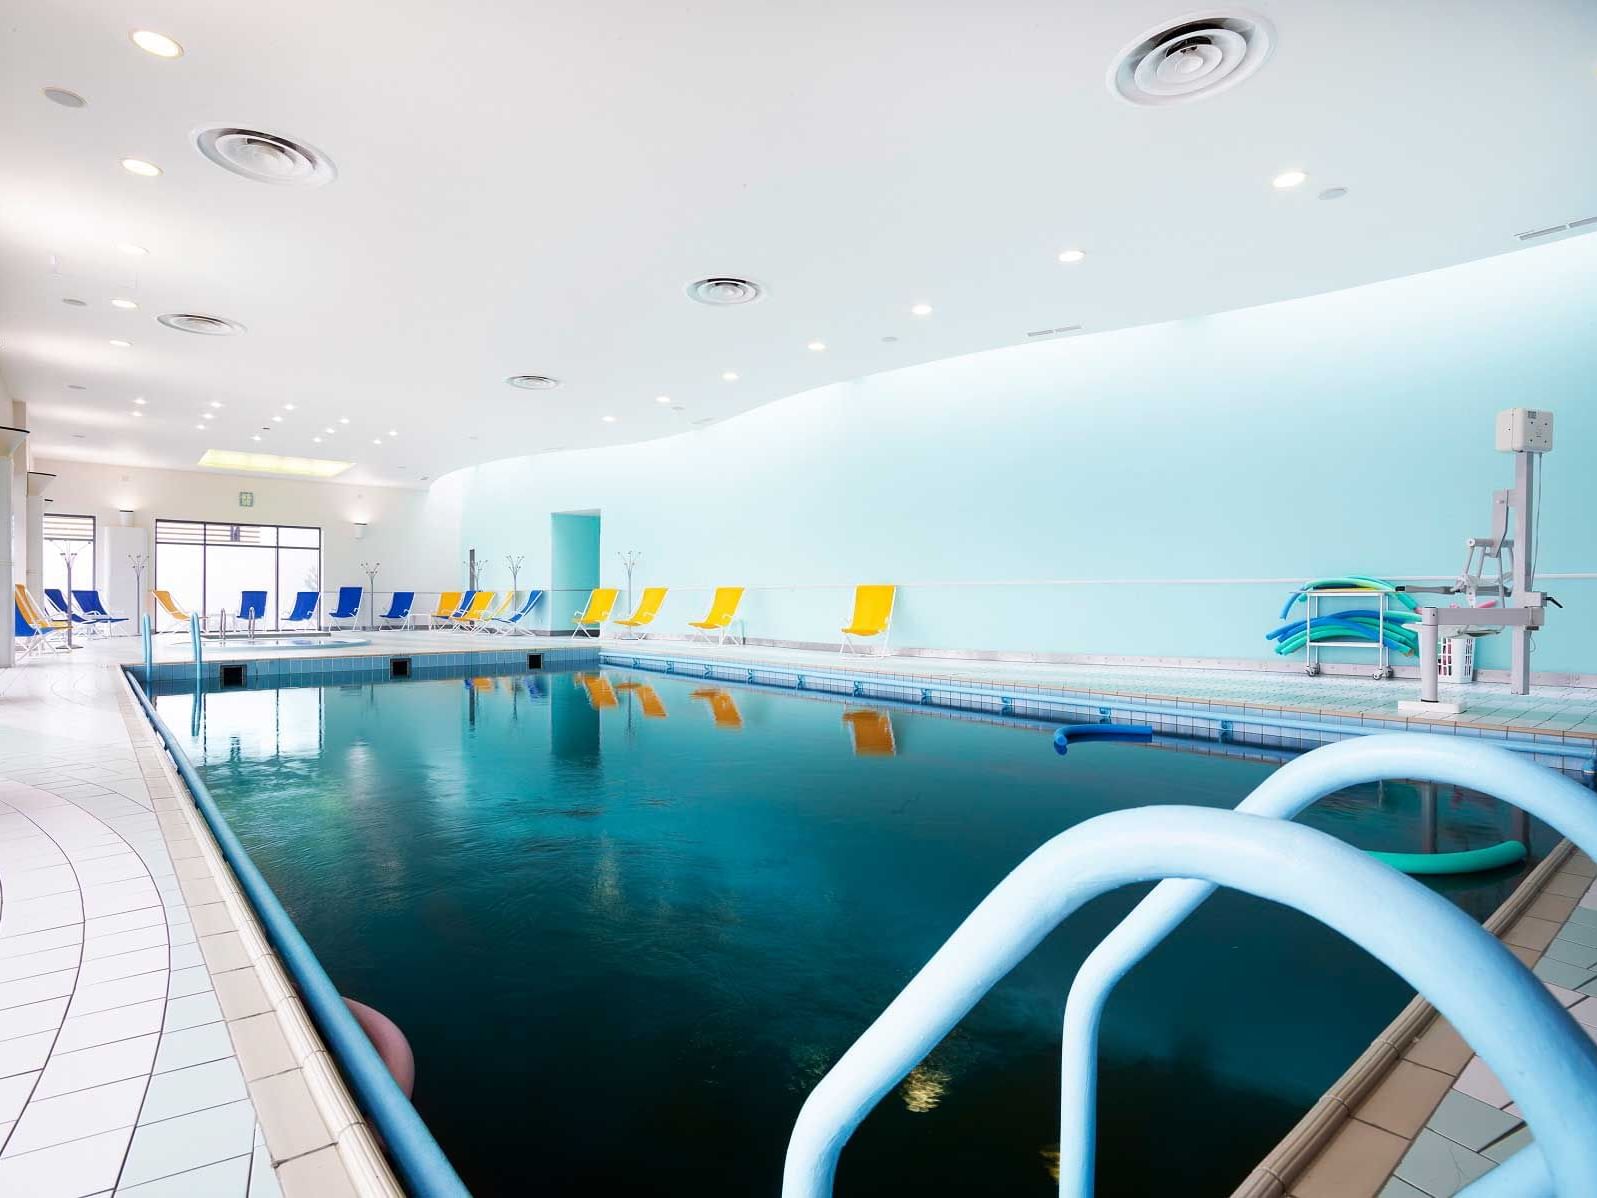 View of the Indoor Treatment Pool at Ana Hotels Europa